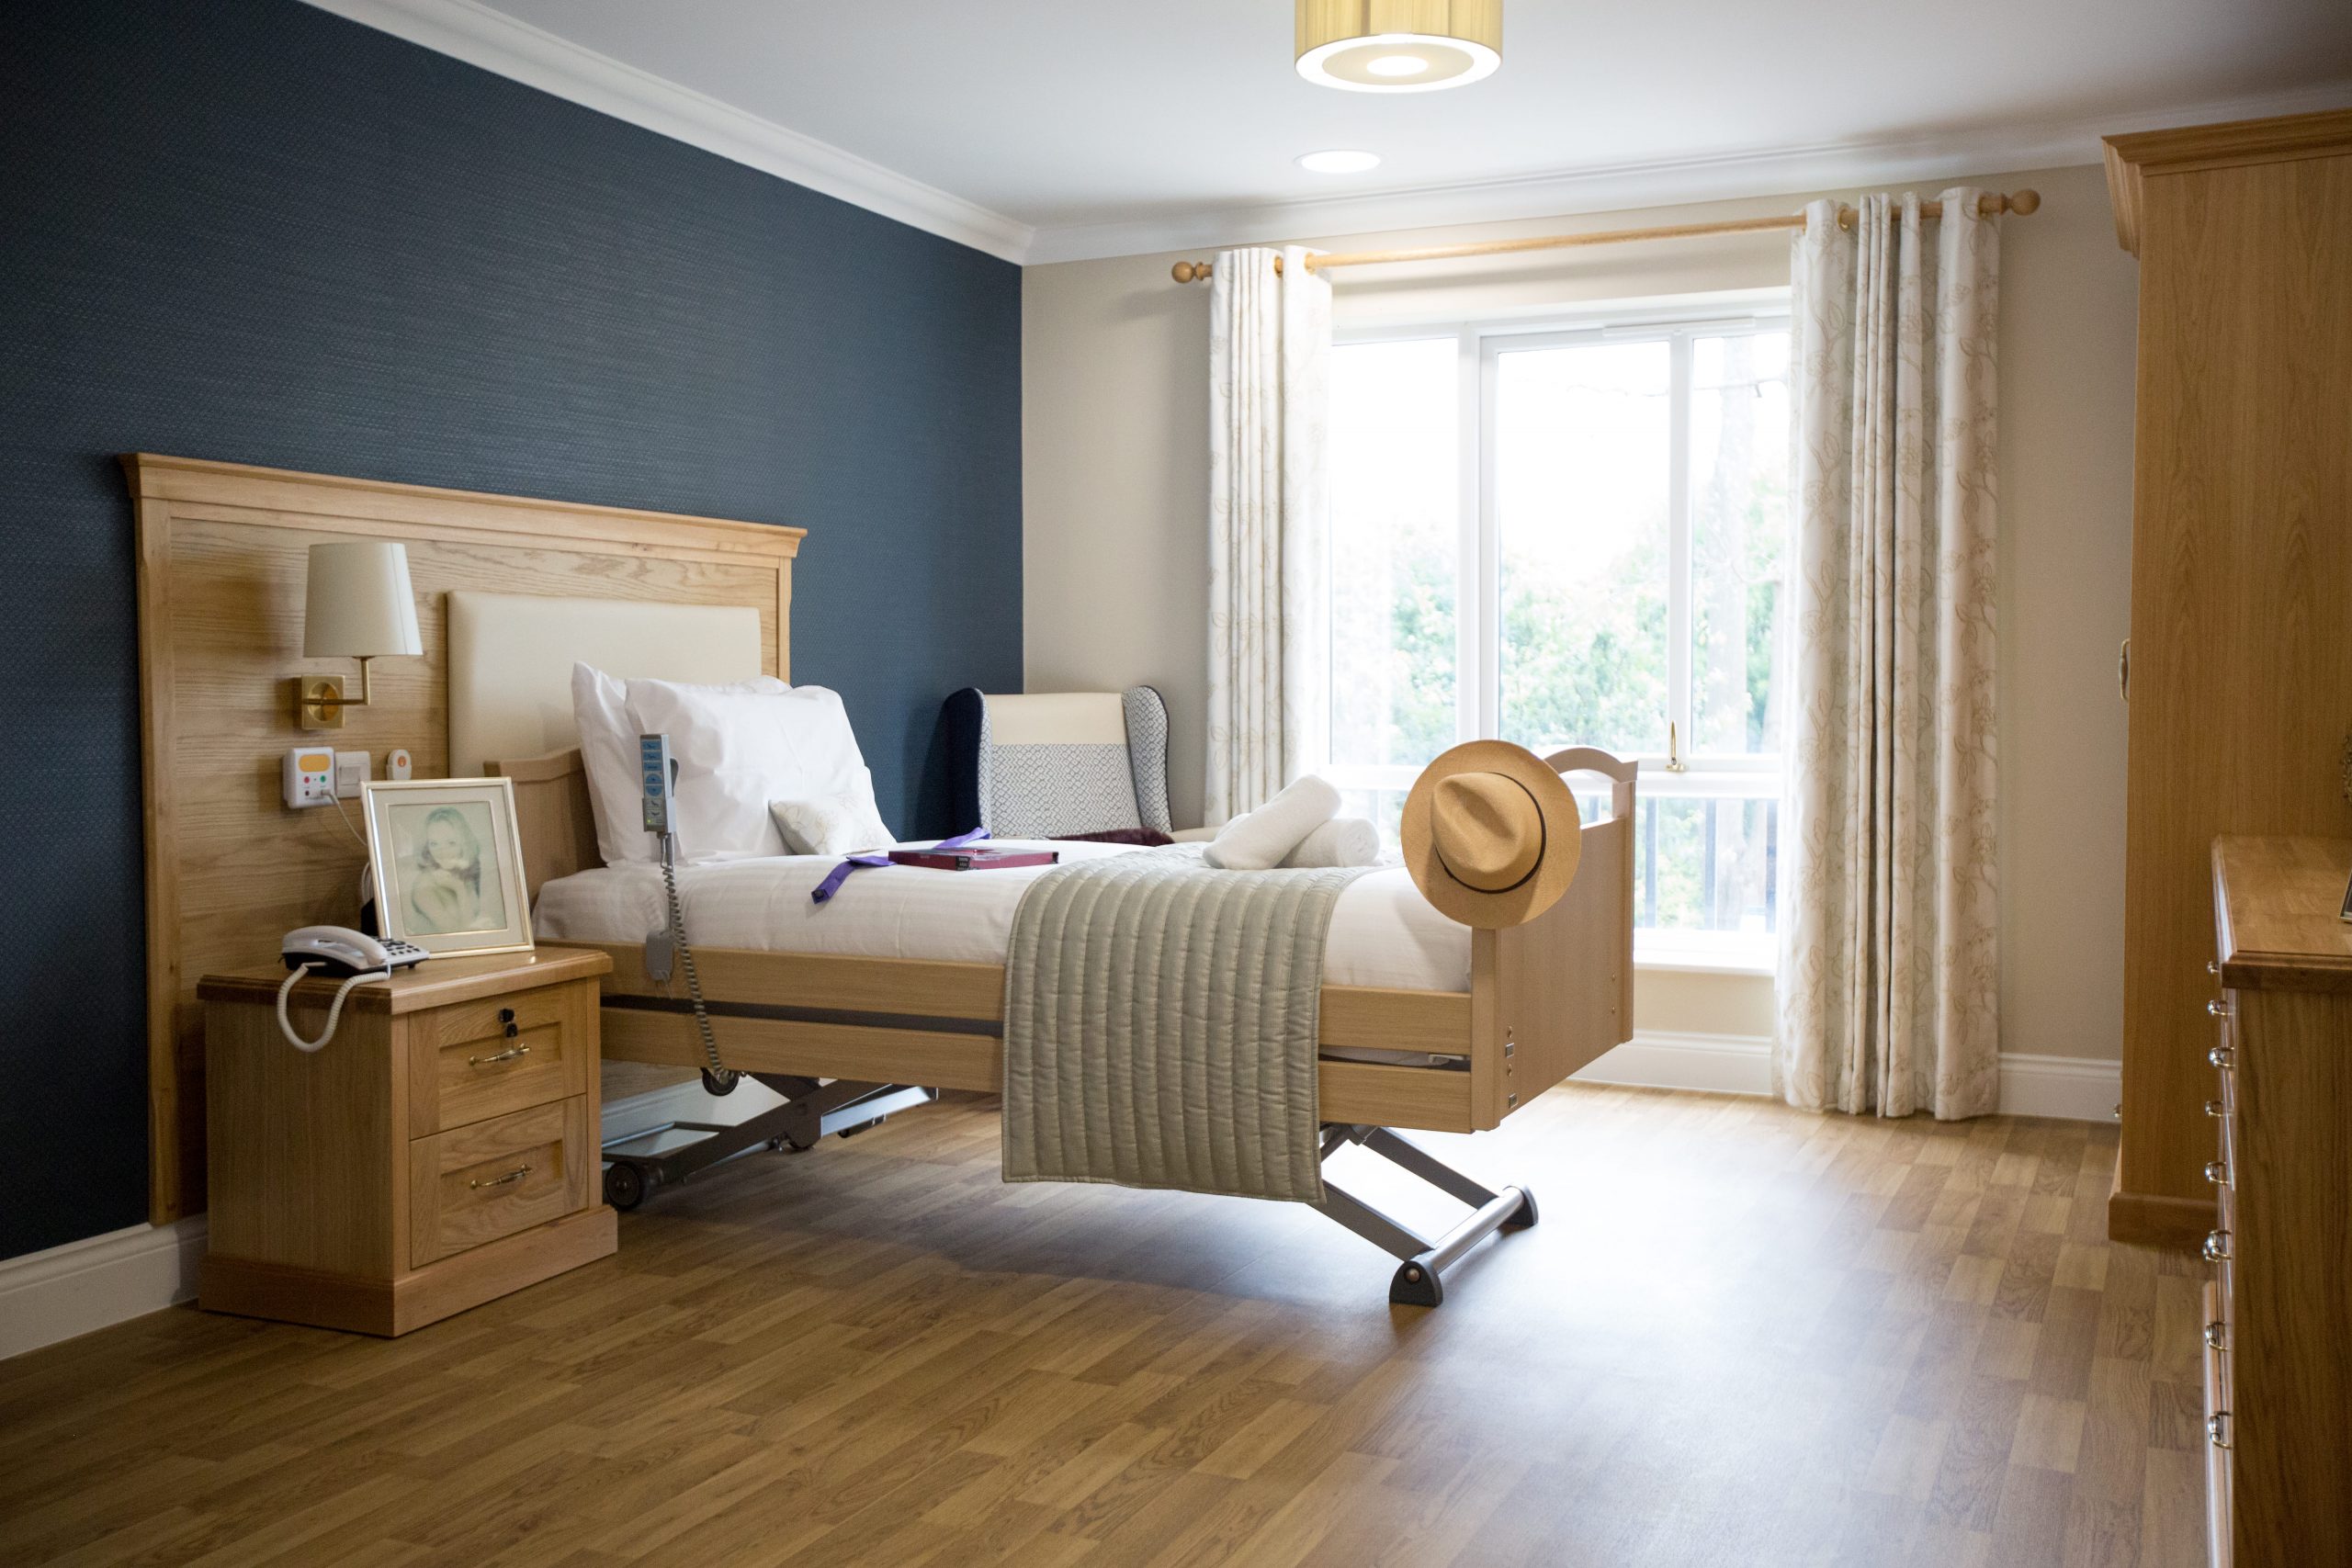 Cuffley Manor Care Home in Hertfordshire